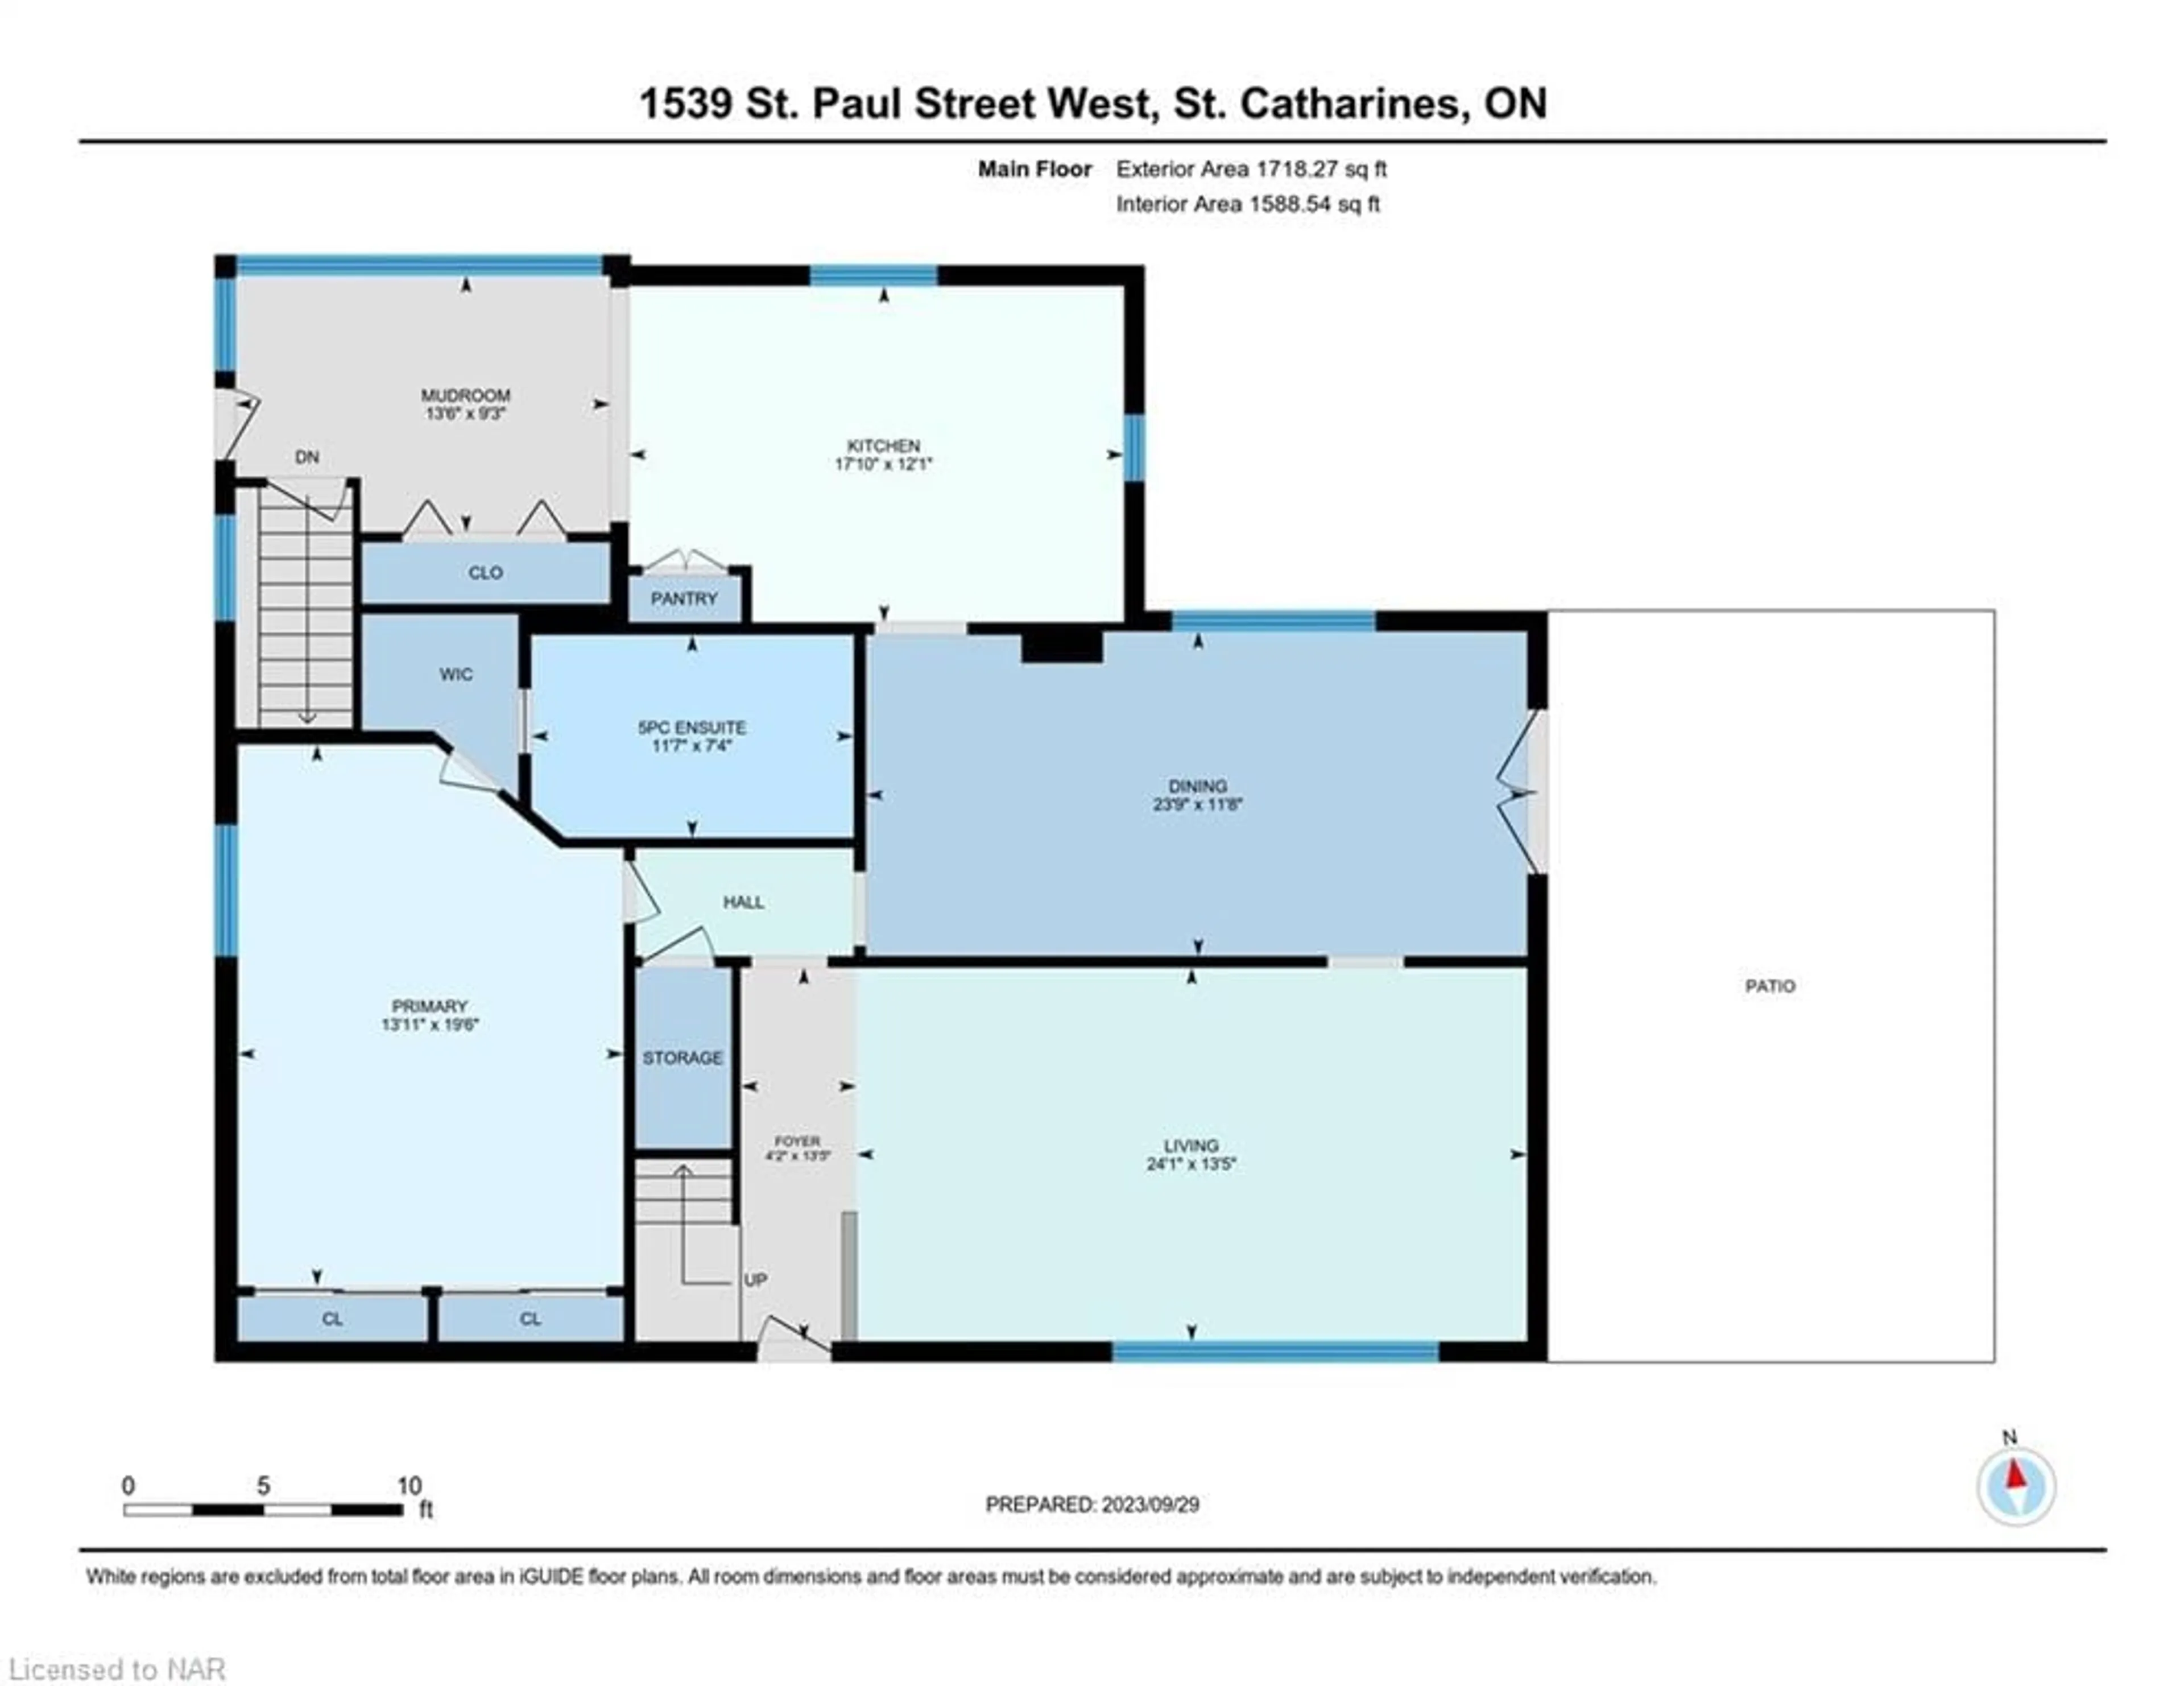 Floor plan for 1539 St. Paul Street West St, St. Catharines Ontario L2R 6P7